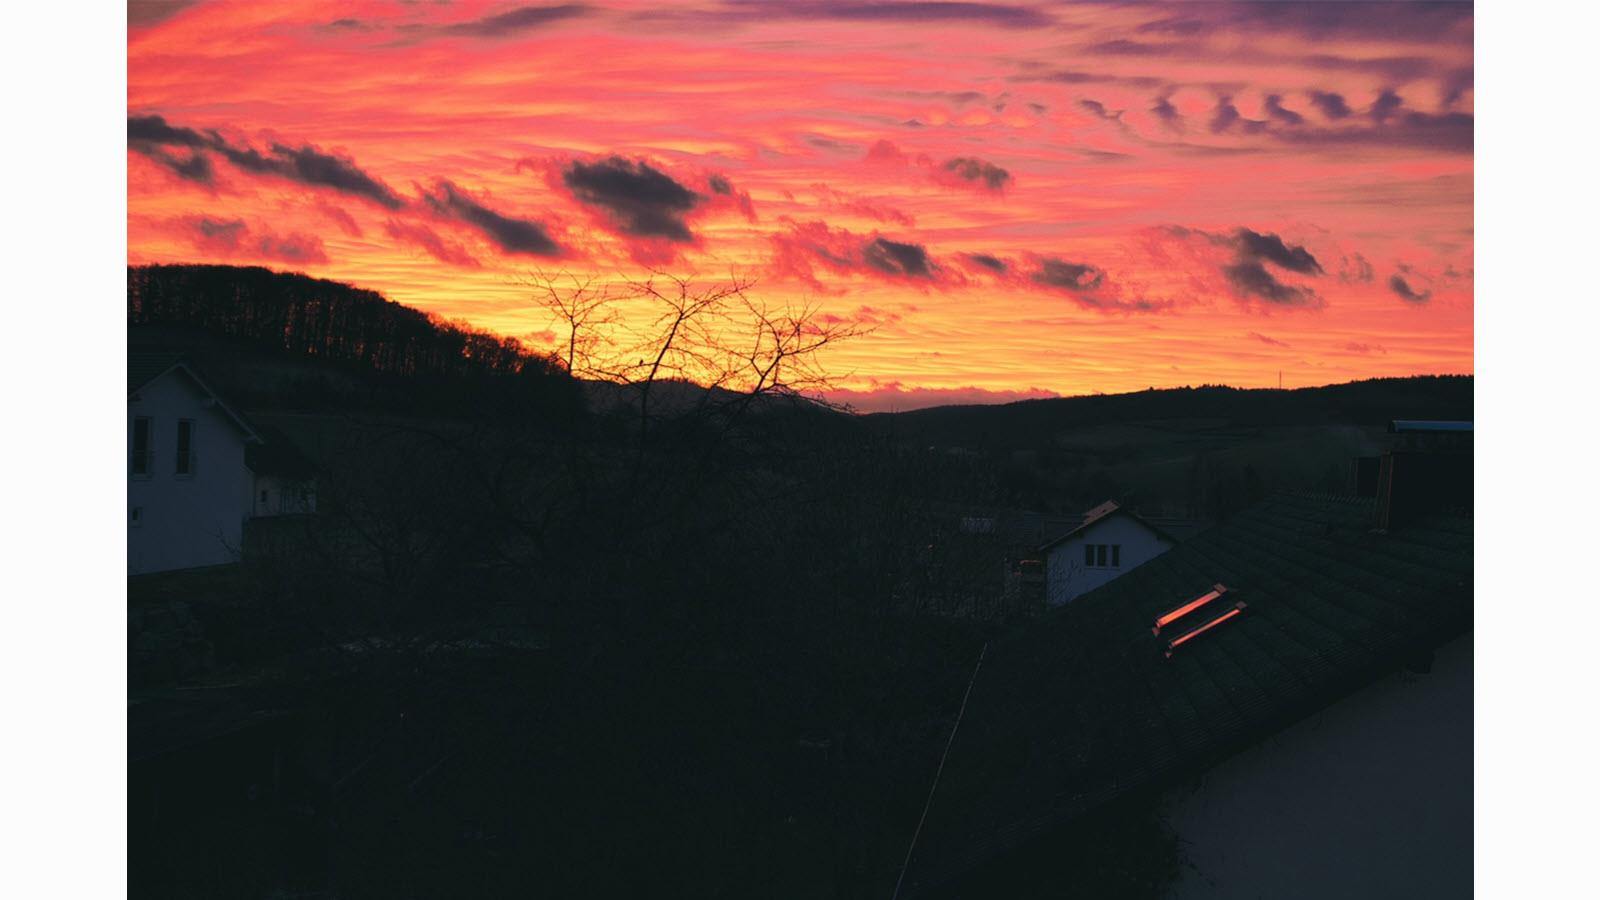 Orange and pink sunset over a mountain in Marburg, Germany